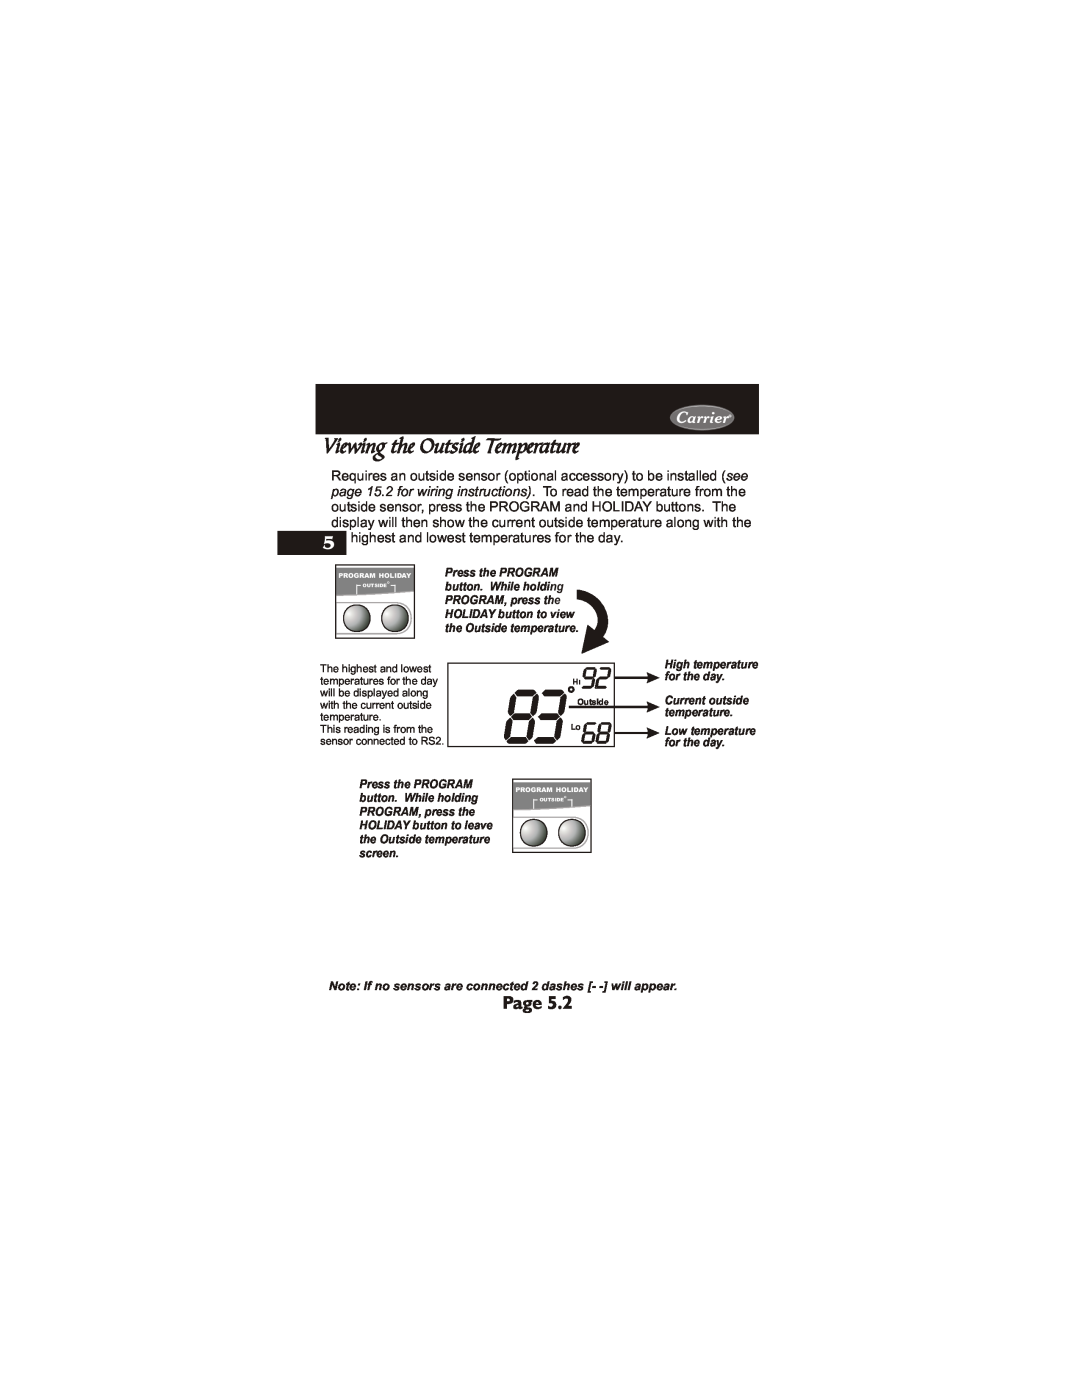 Carrier 33CS450-01 owner manual Viewing the Outside Temperature, Page, Carrier 